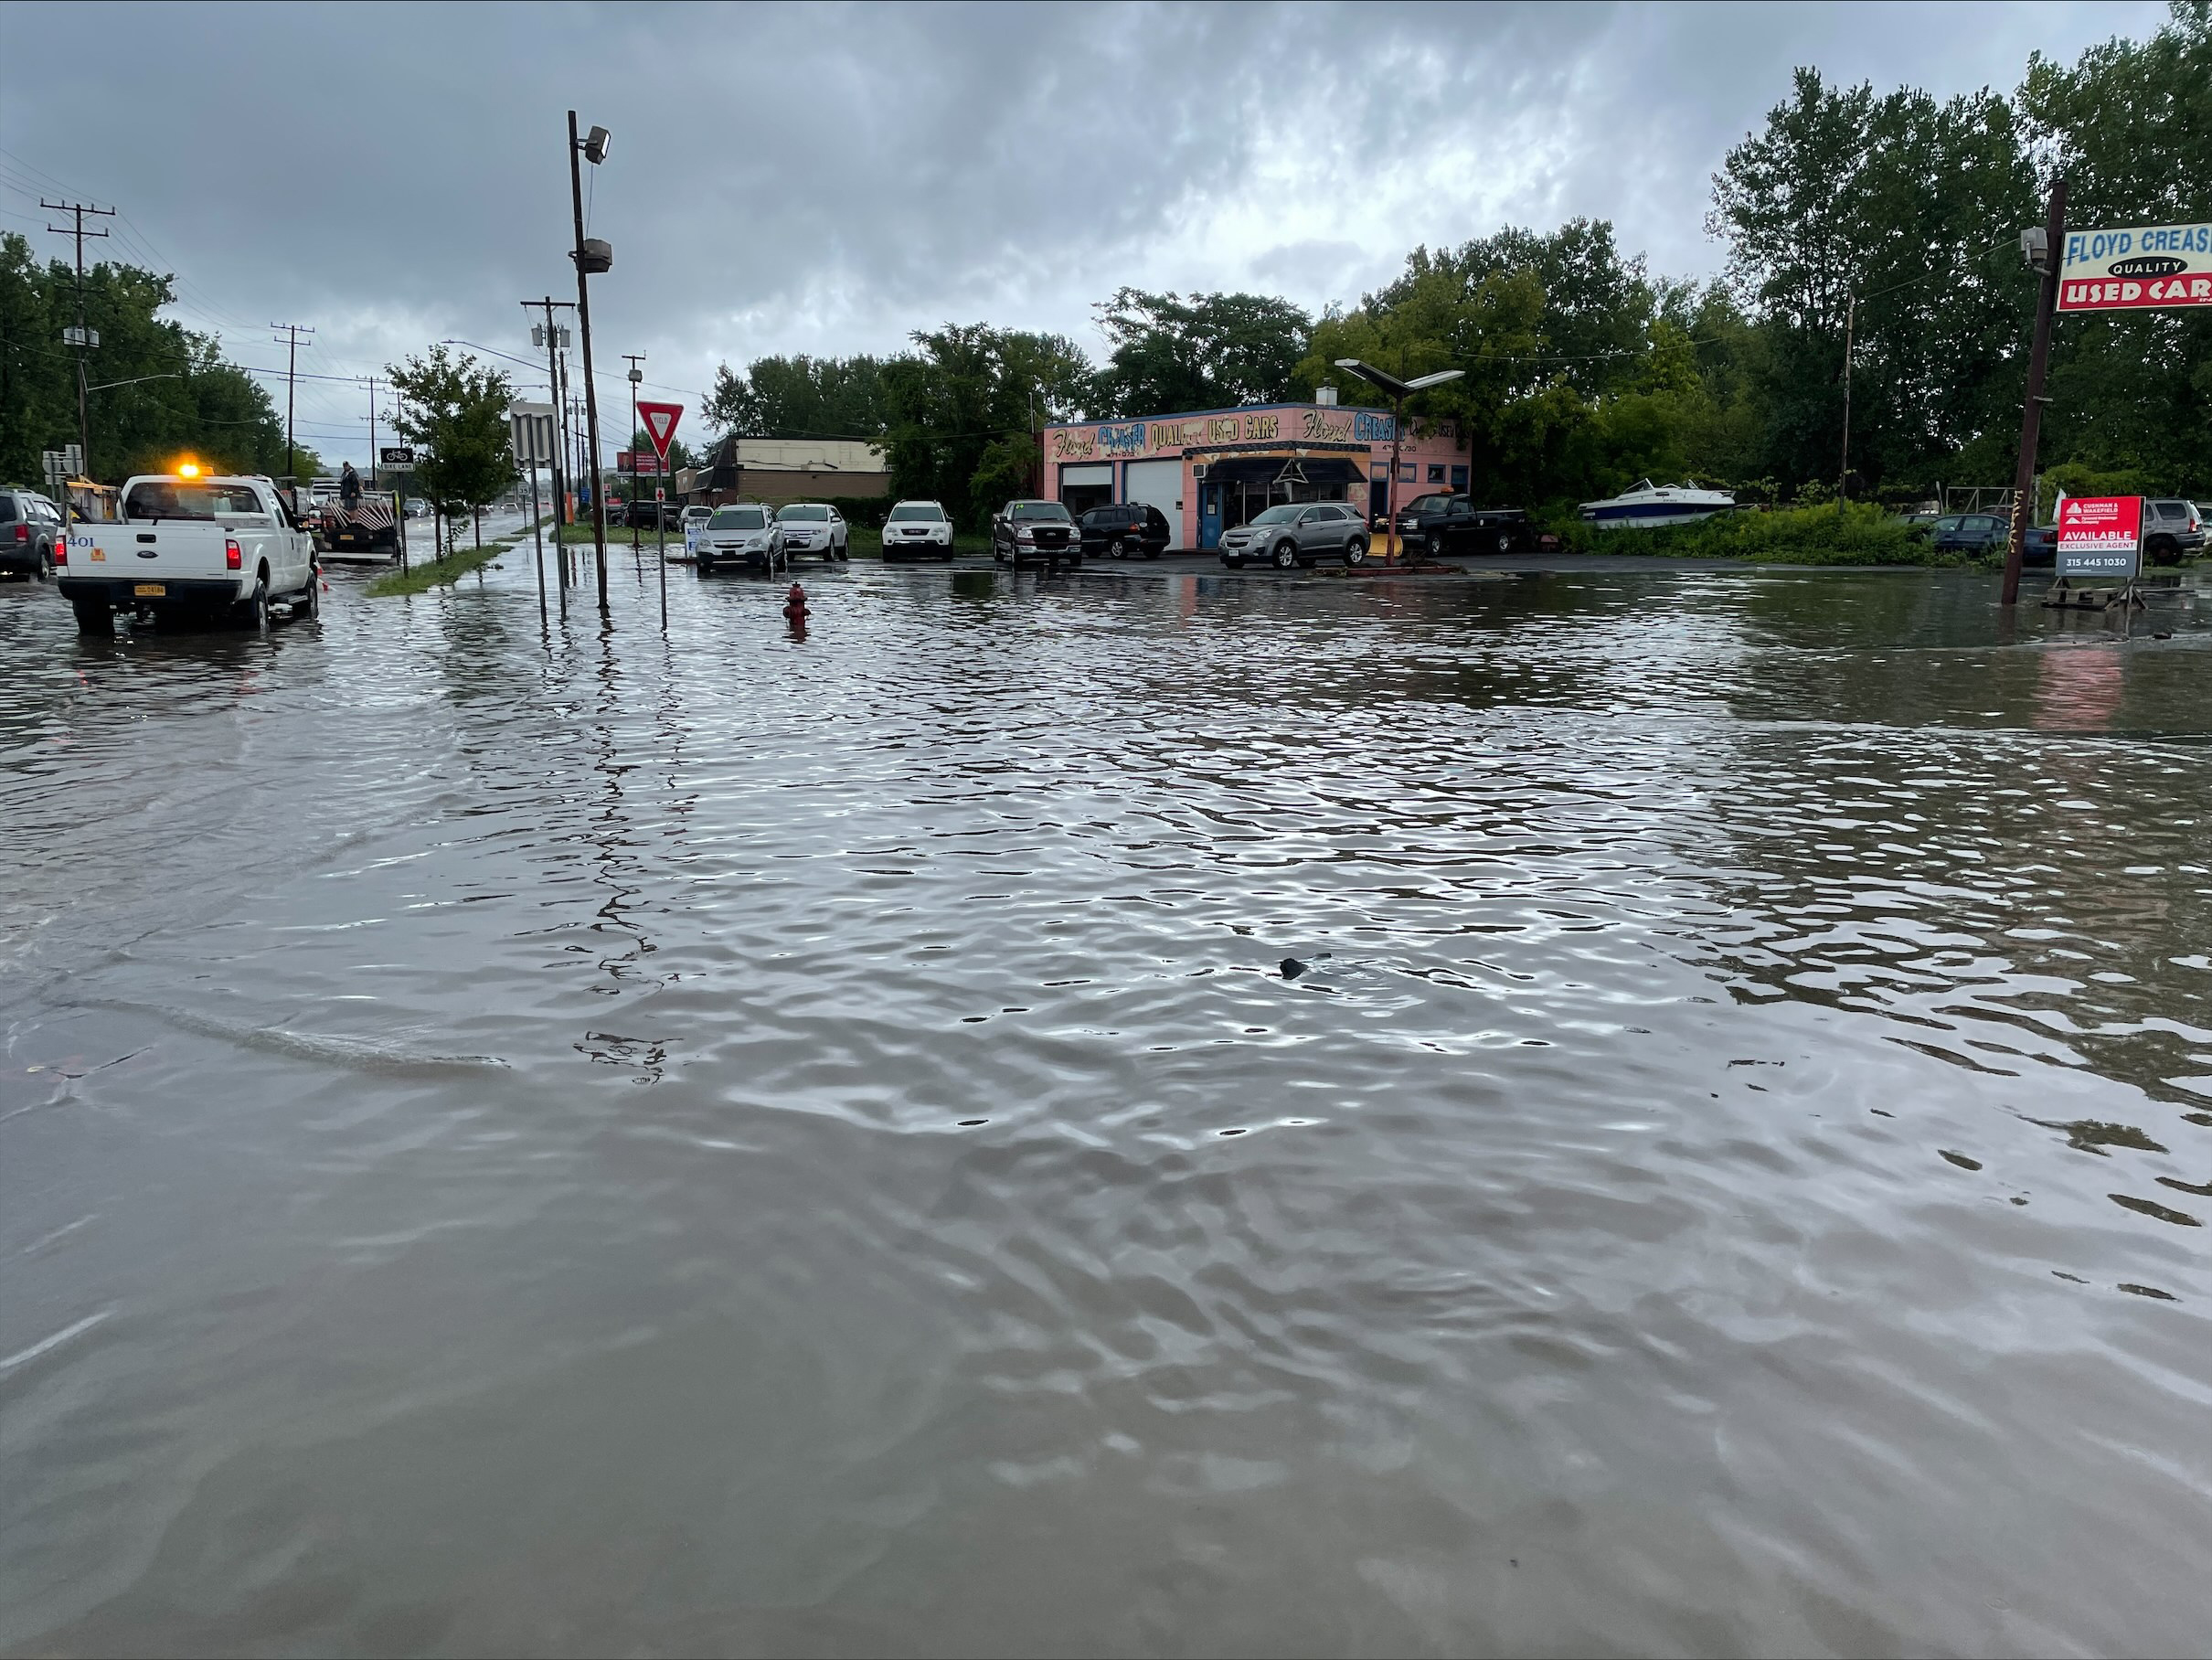 Portions of Hiawatha Boulevard and Spencer Street were flooded Thursday, Aug. 19. 2021, after steady rain continued in Central New York.